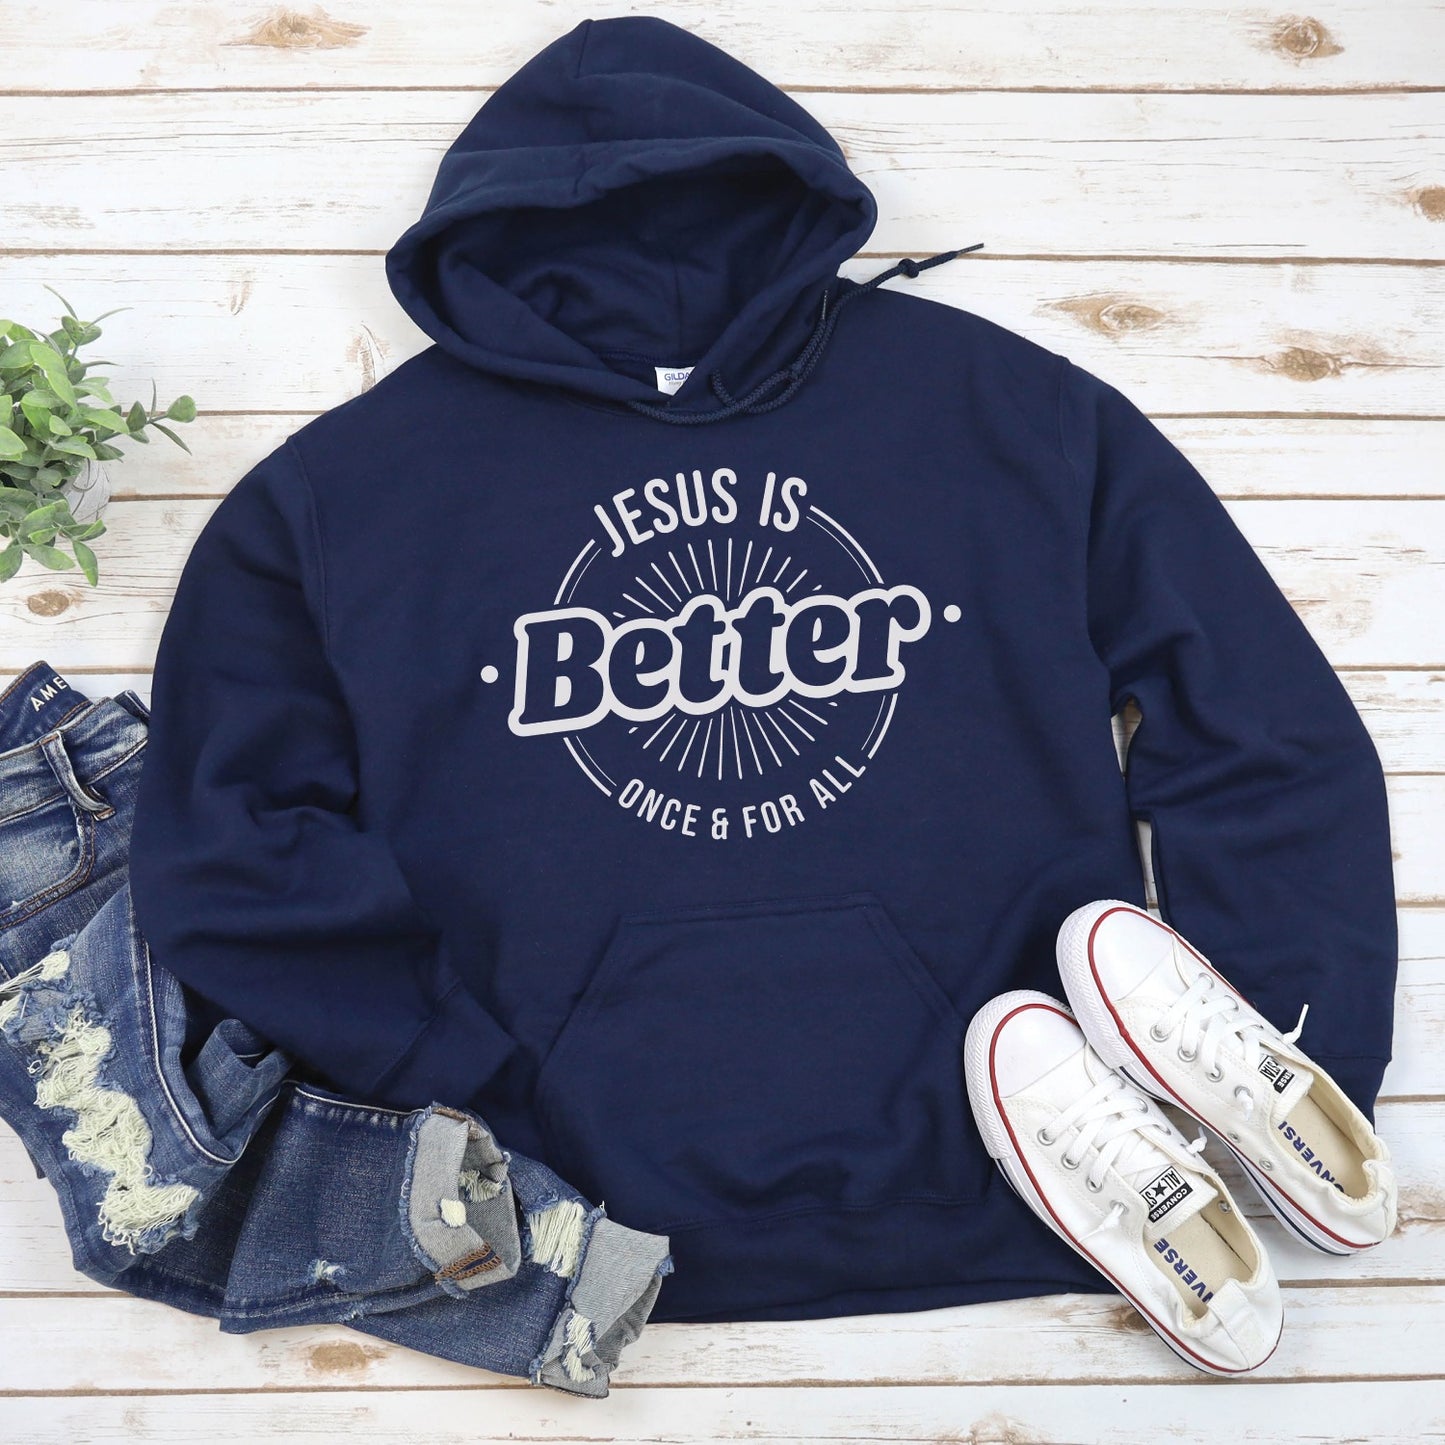 Navy blue color faith-based oversized cozy hoodie with "Jesus is BETTER - Once and For All" logo style design in white, created for Christian men and women